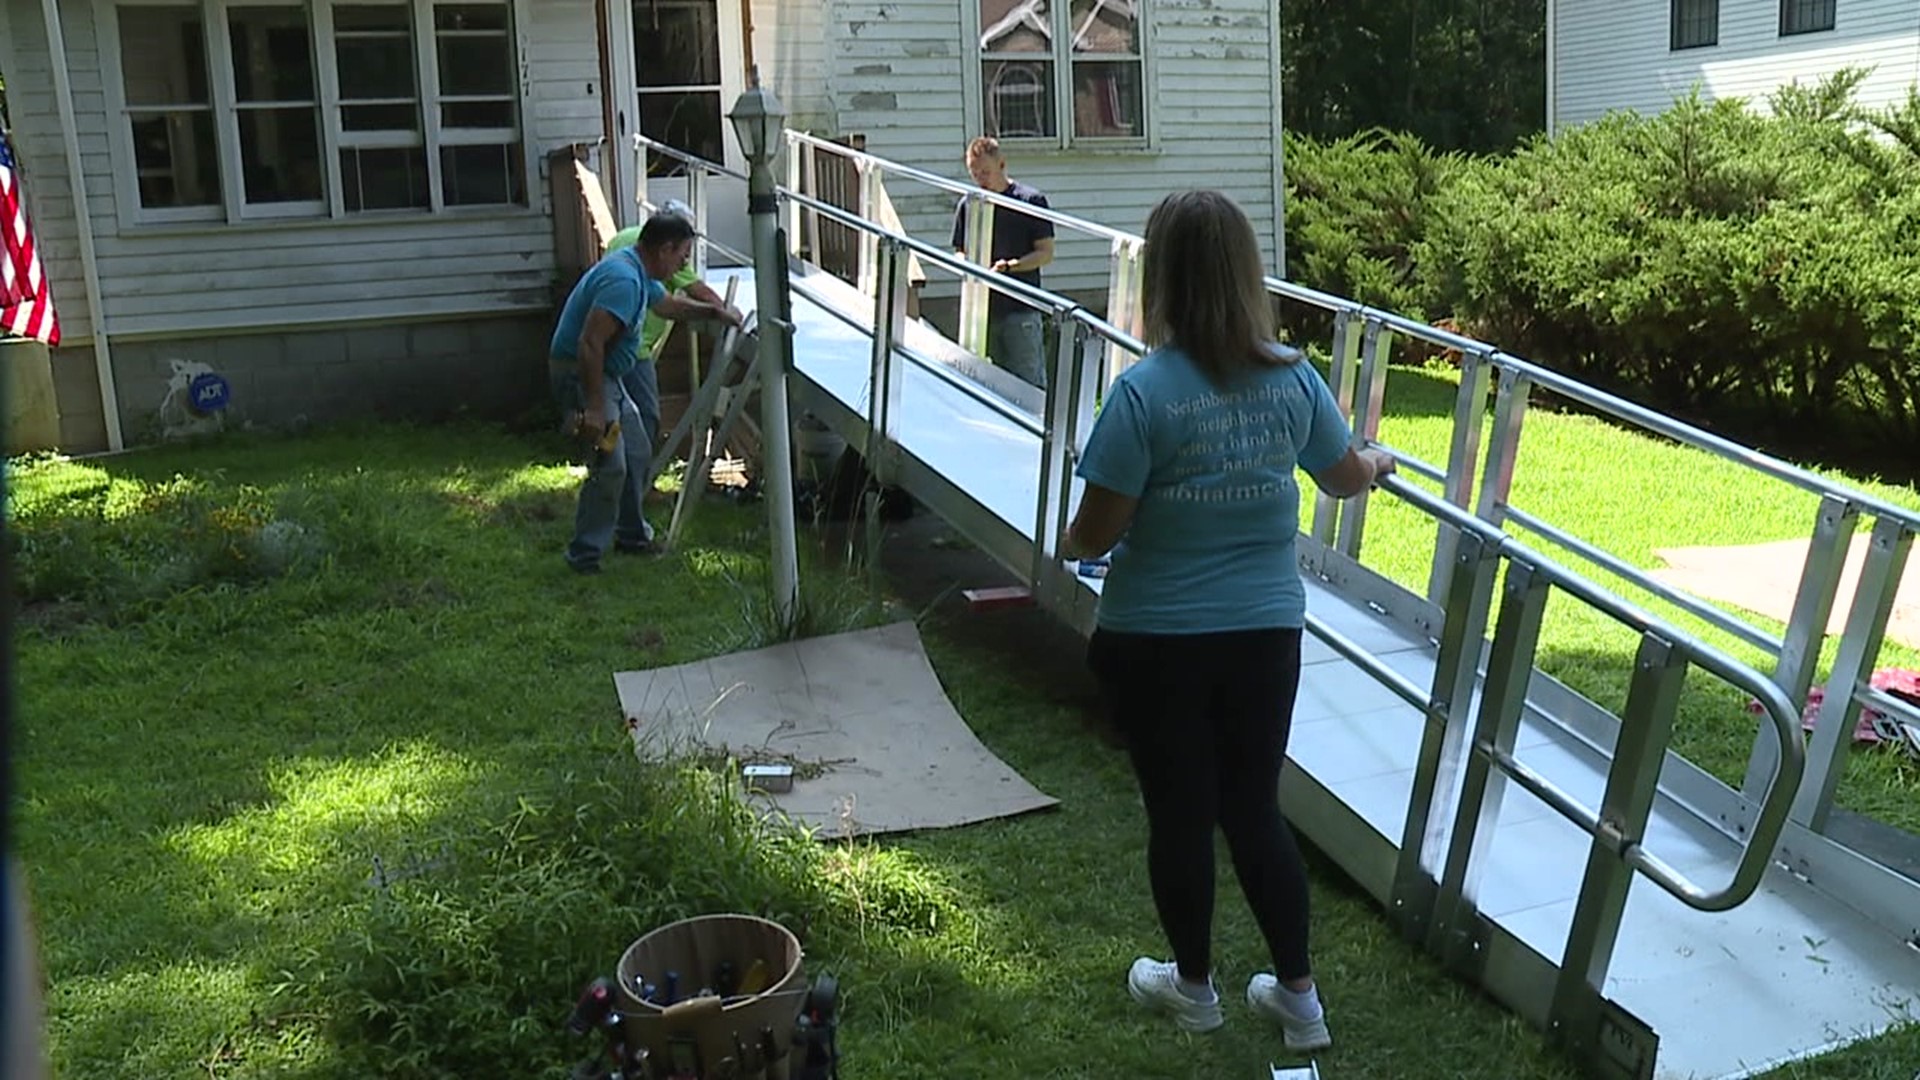 A woman in Monroe County had some helping hands making important updates to her home.